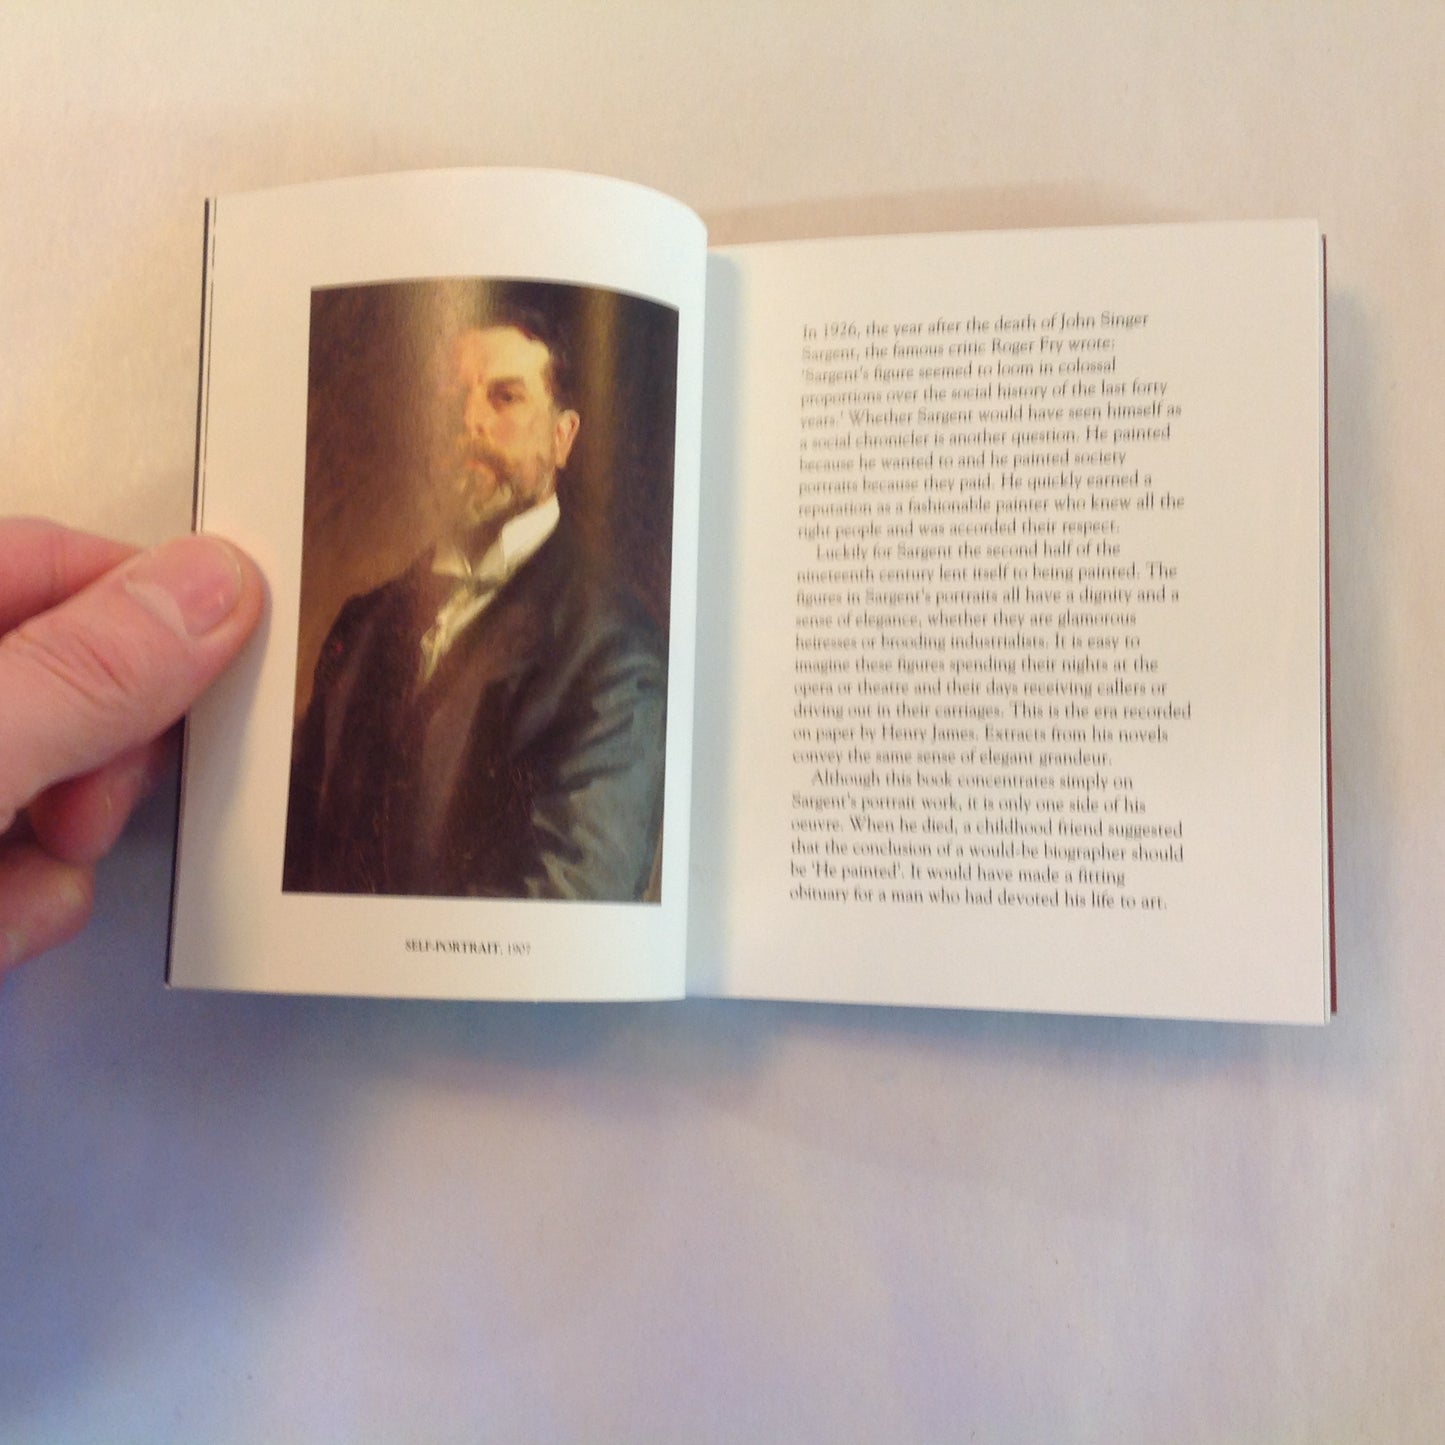 Vintage 1996 Trade Paperback Gift Book The Age of Elegance: The Paintings of John Singer Sargent Phaidon